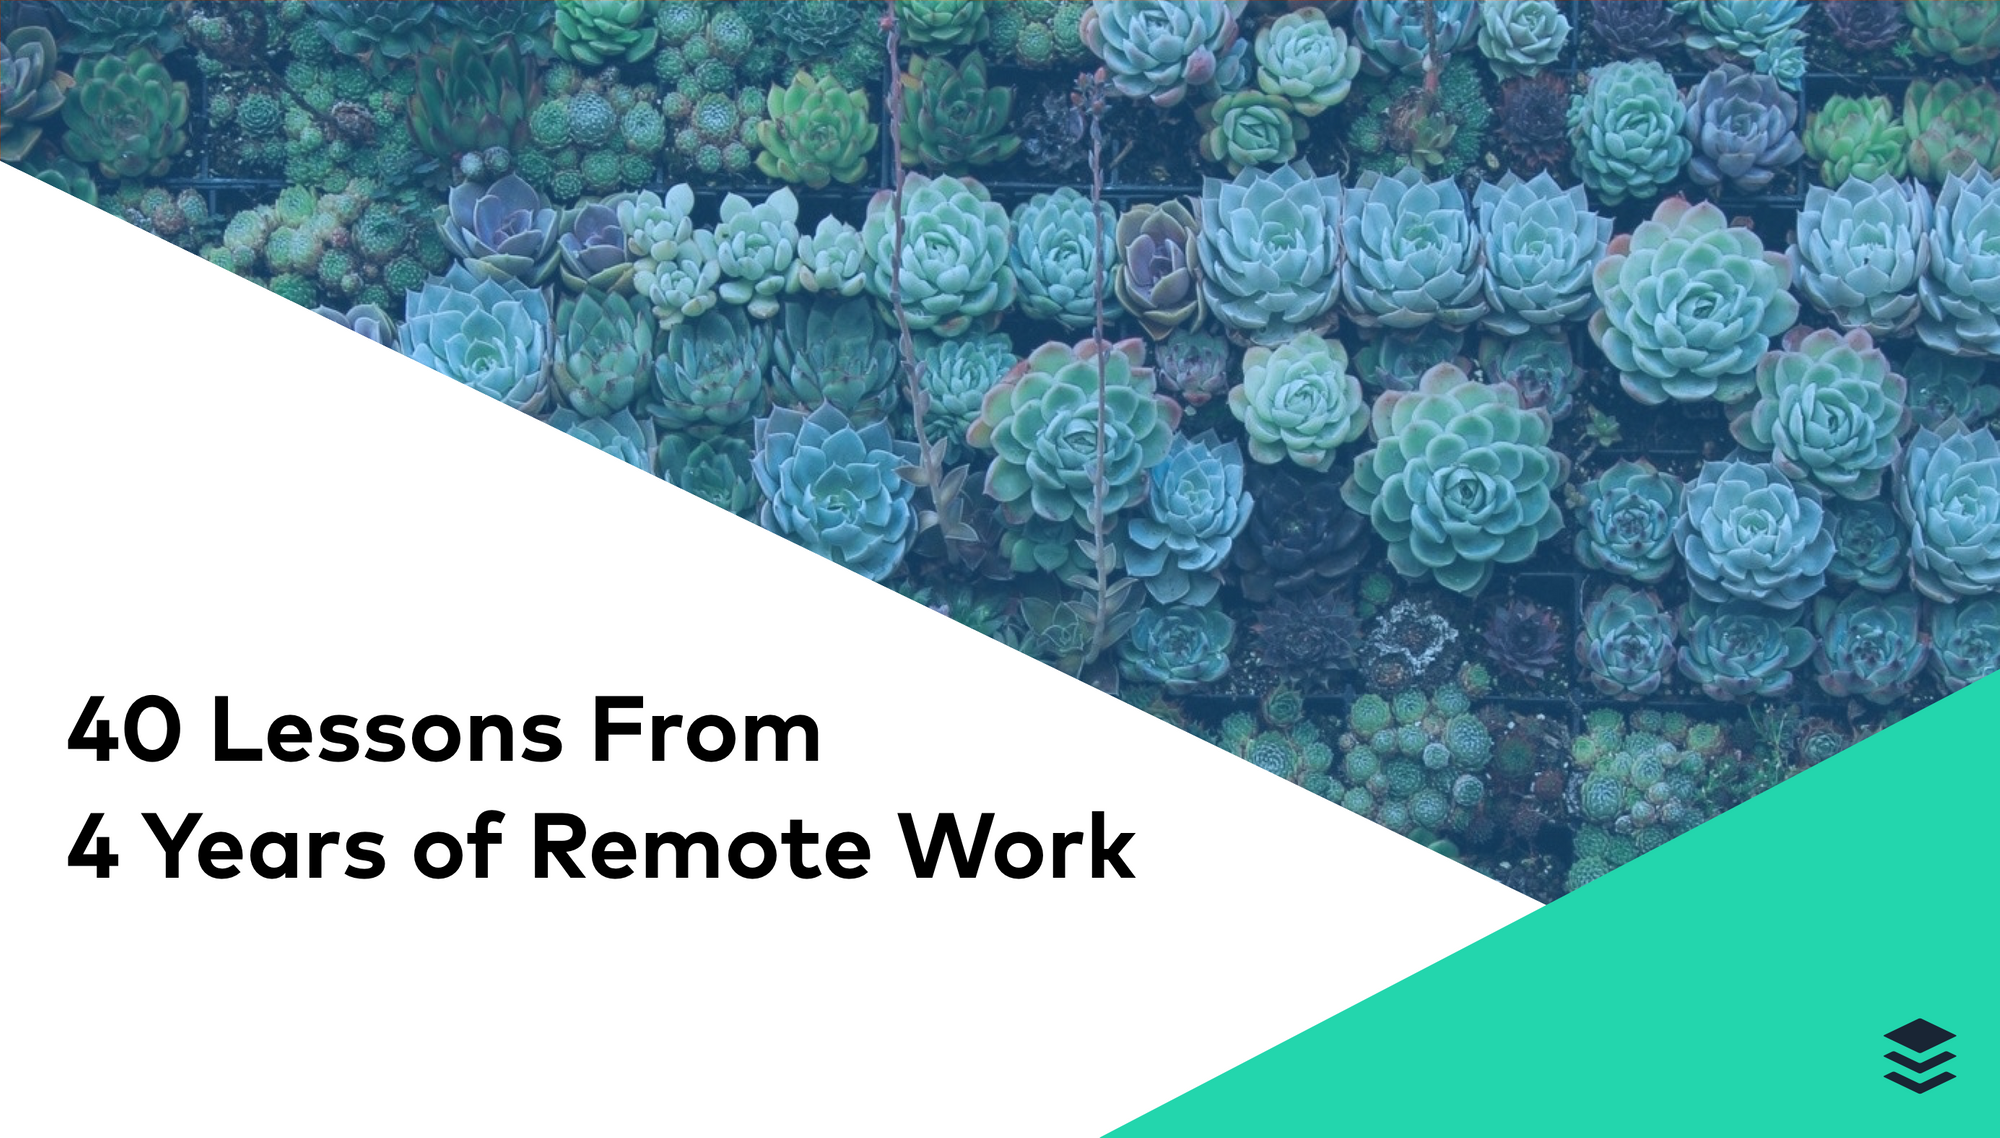 40 Lessons From 4 Years of Remote Work